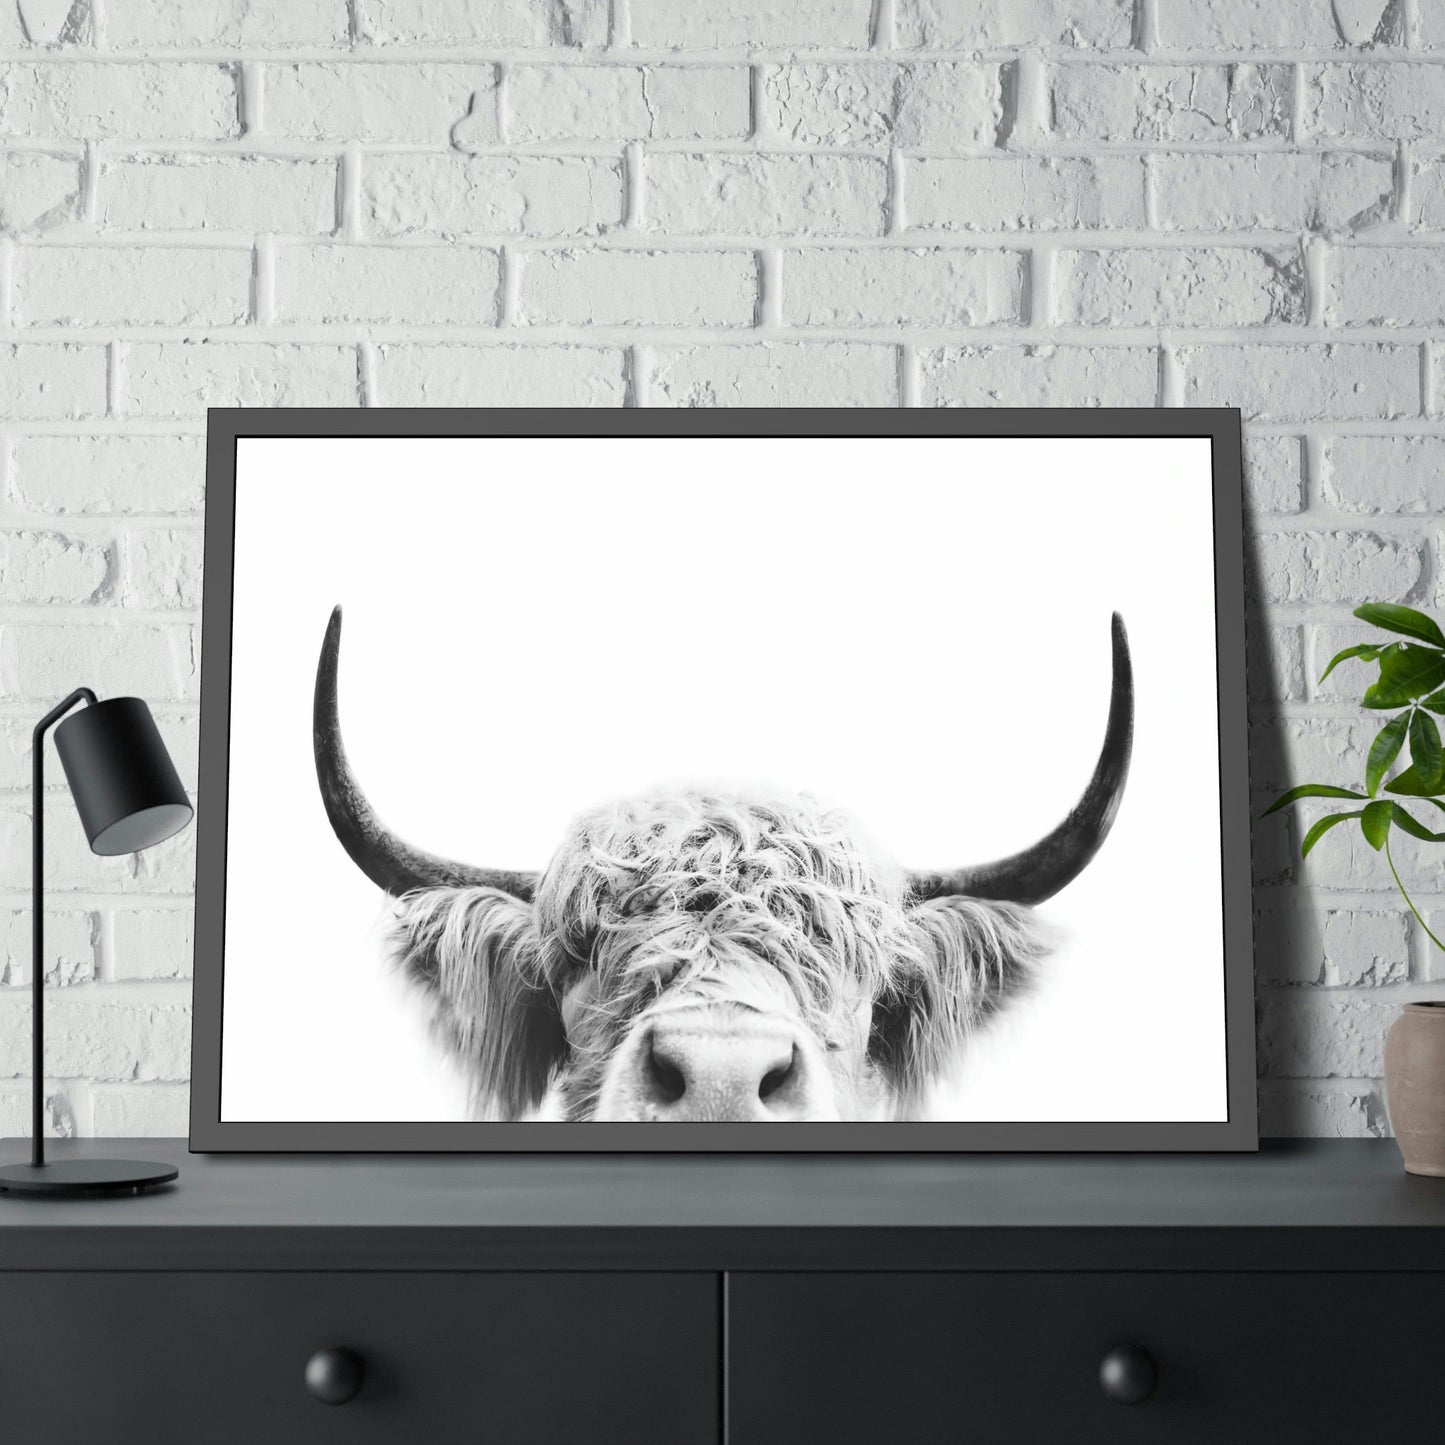 Highland Cow | Close-up of a Horned Cow | Wall Art — Pixoram